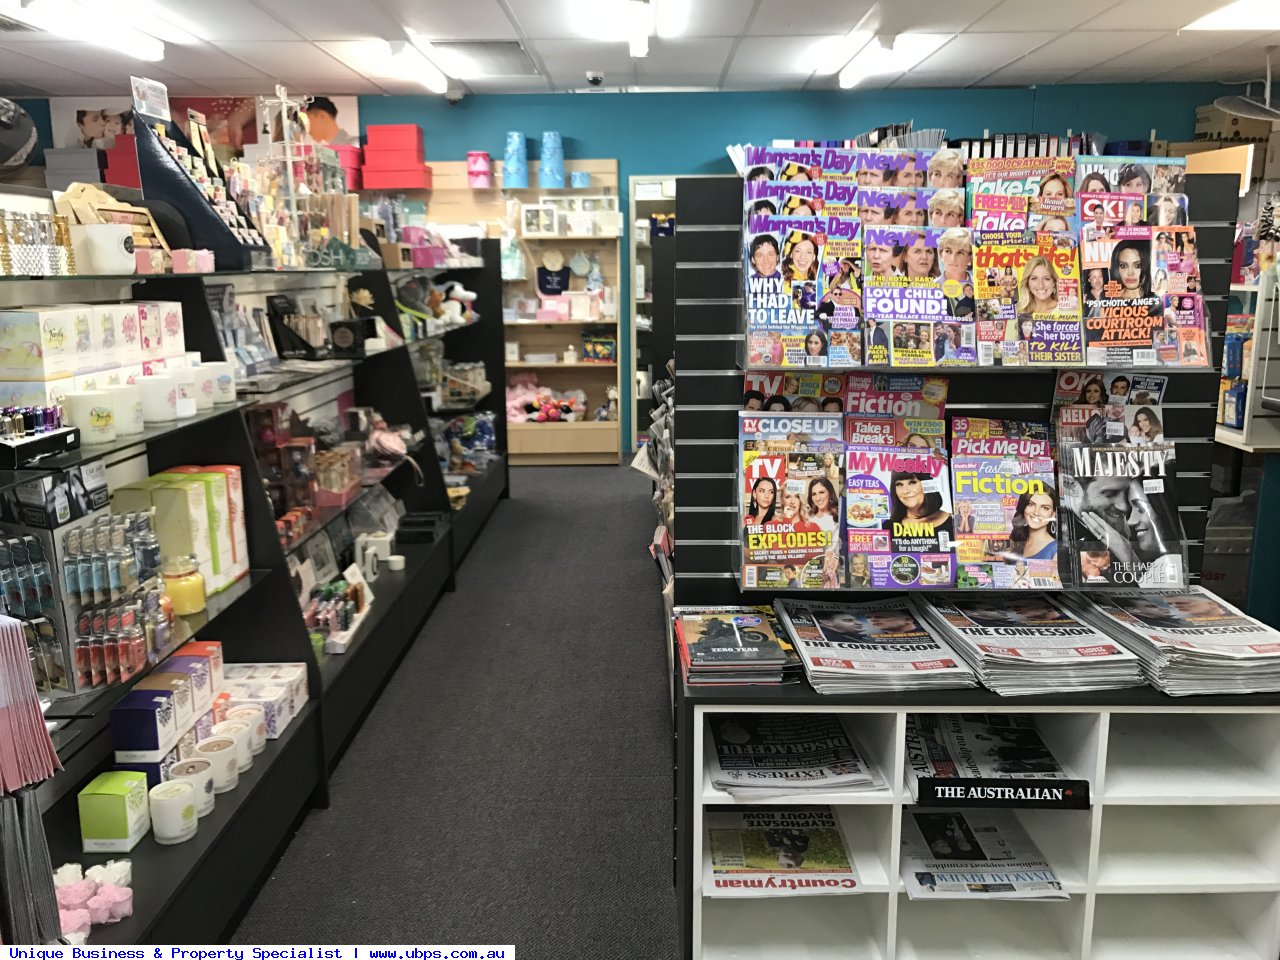 All Agencys - Post Office, Newsagency, Lotteries